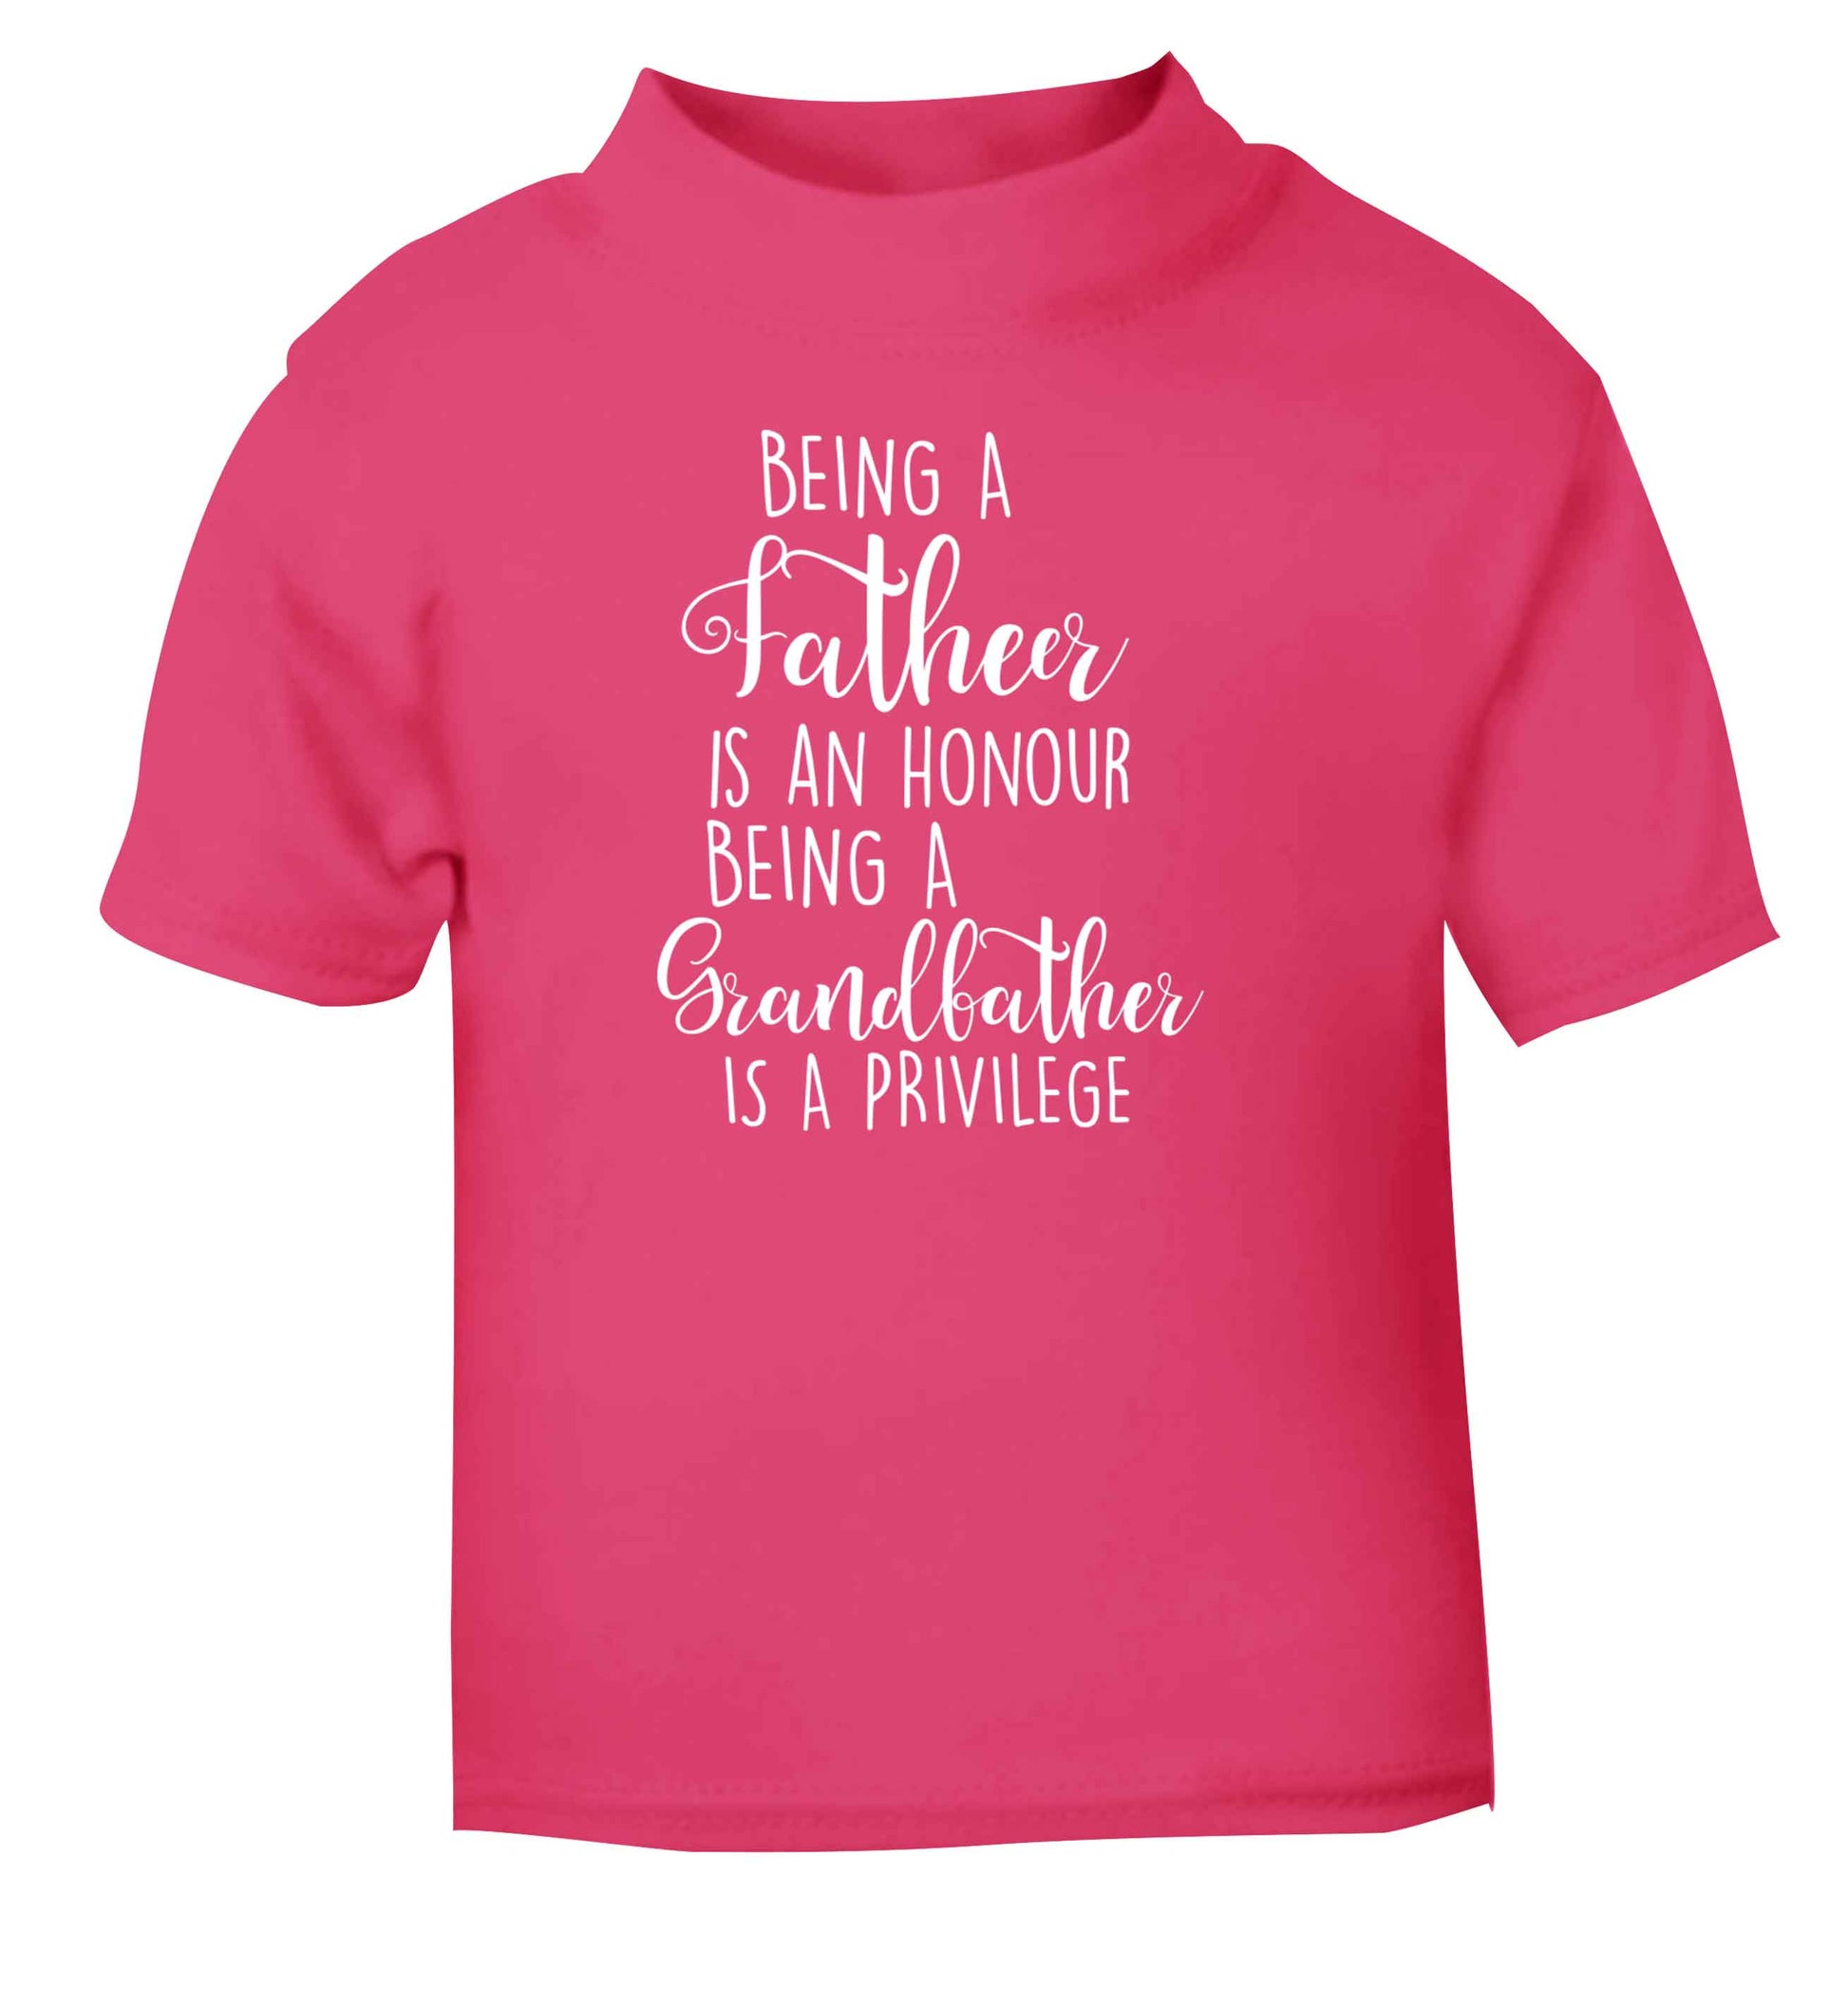 Being a father is an honour being a grandfather is a privilege pink Baby Toddler Tshirt 2 Years